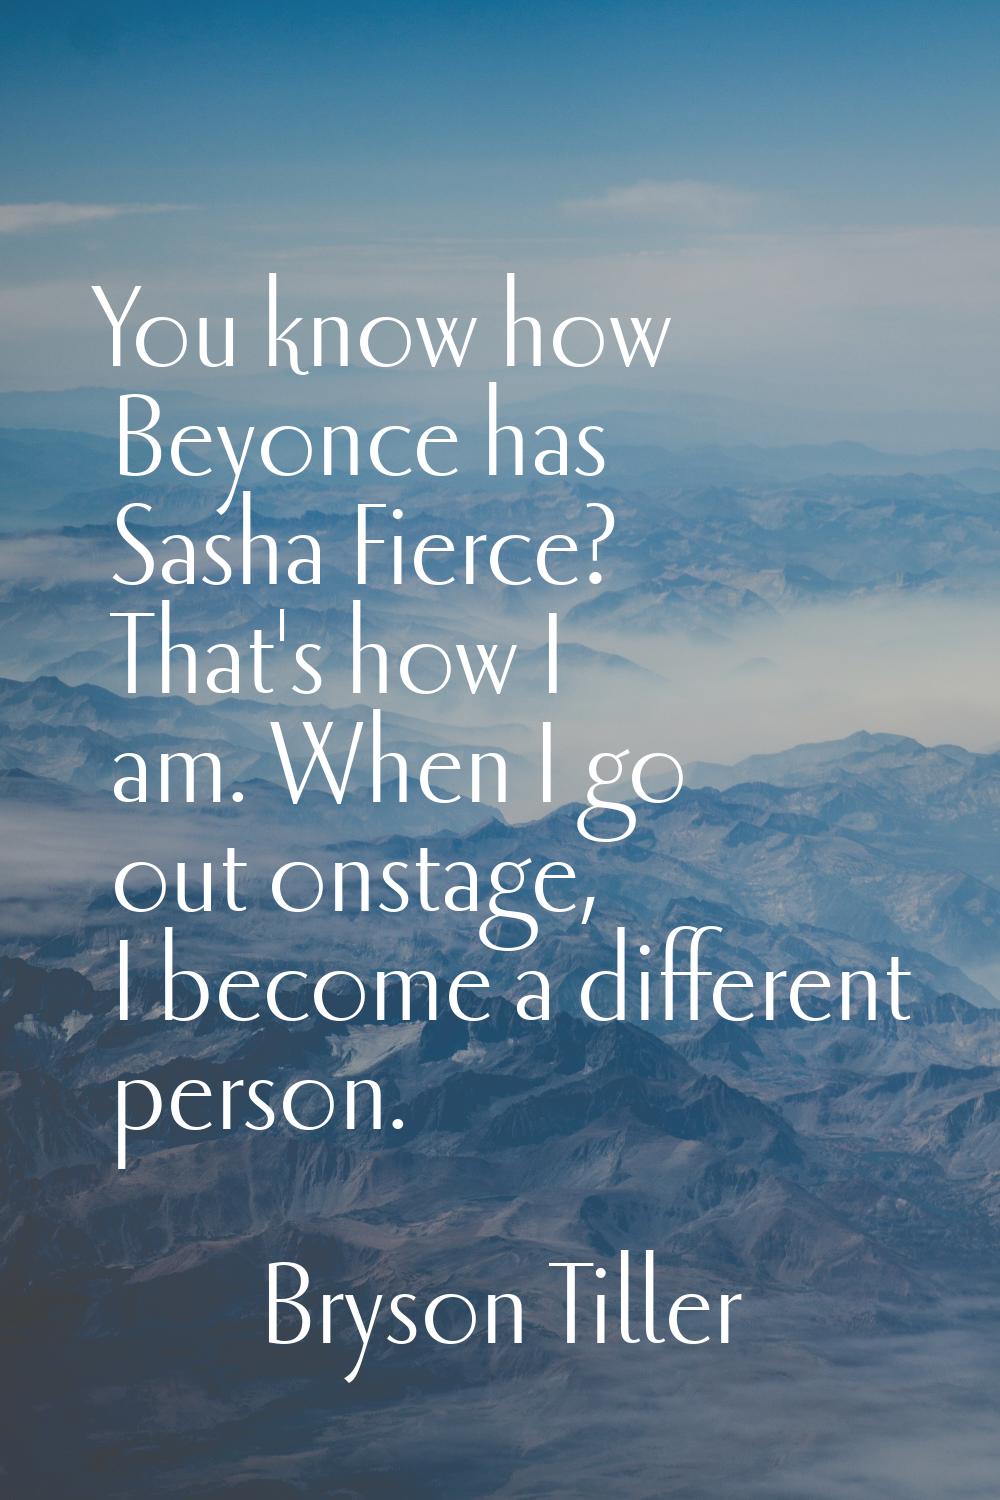 You know how Beyonce has Sasha Fierce? That's how I am. When I go out onstage, I become a different